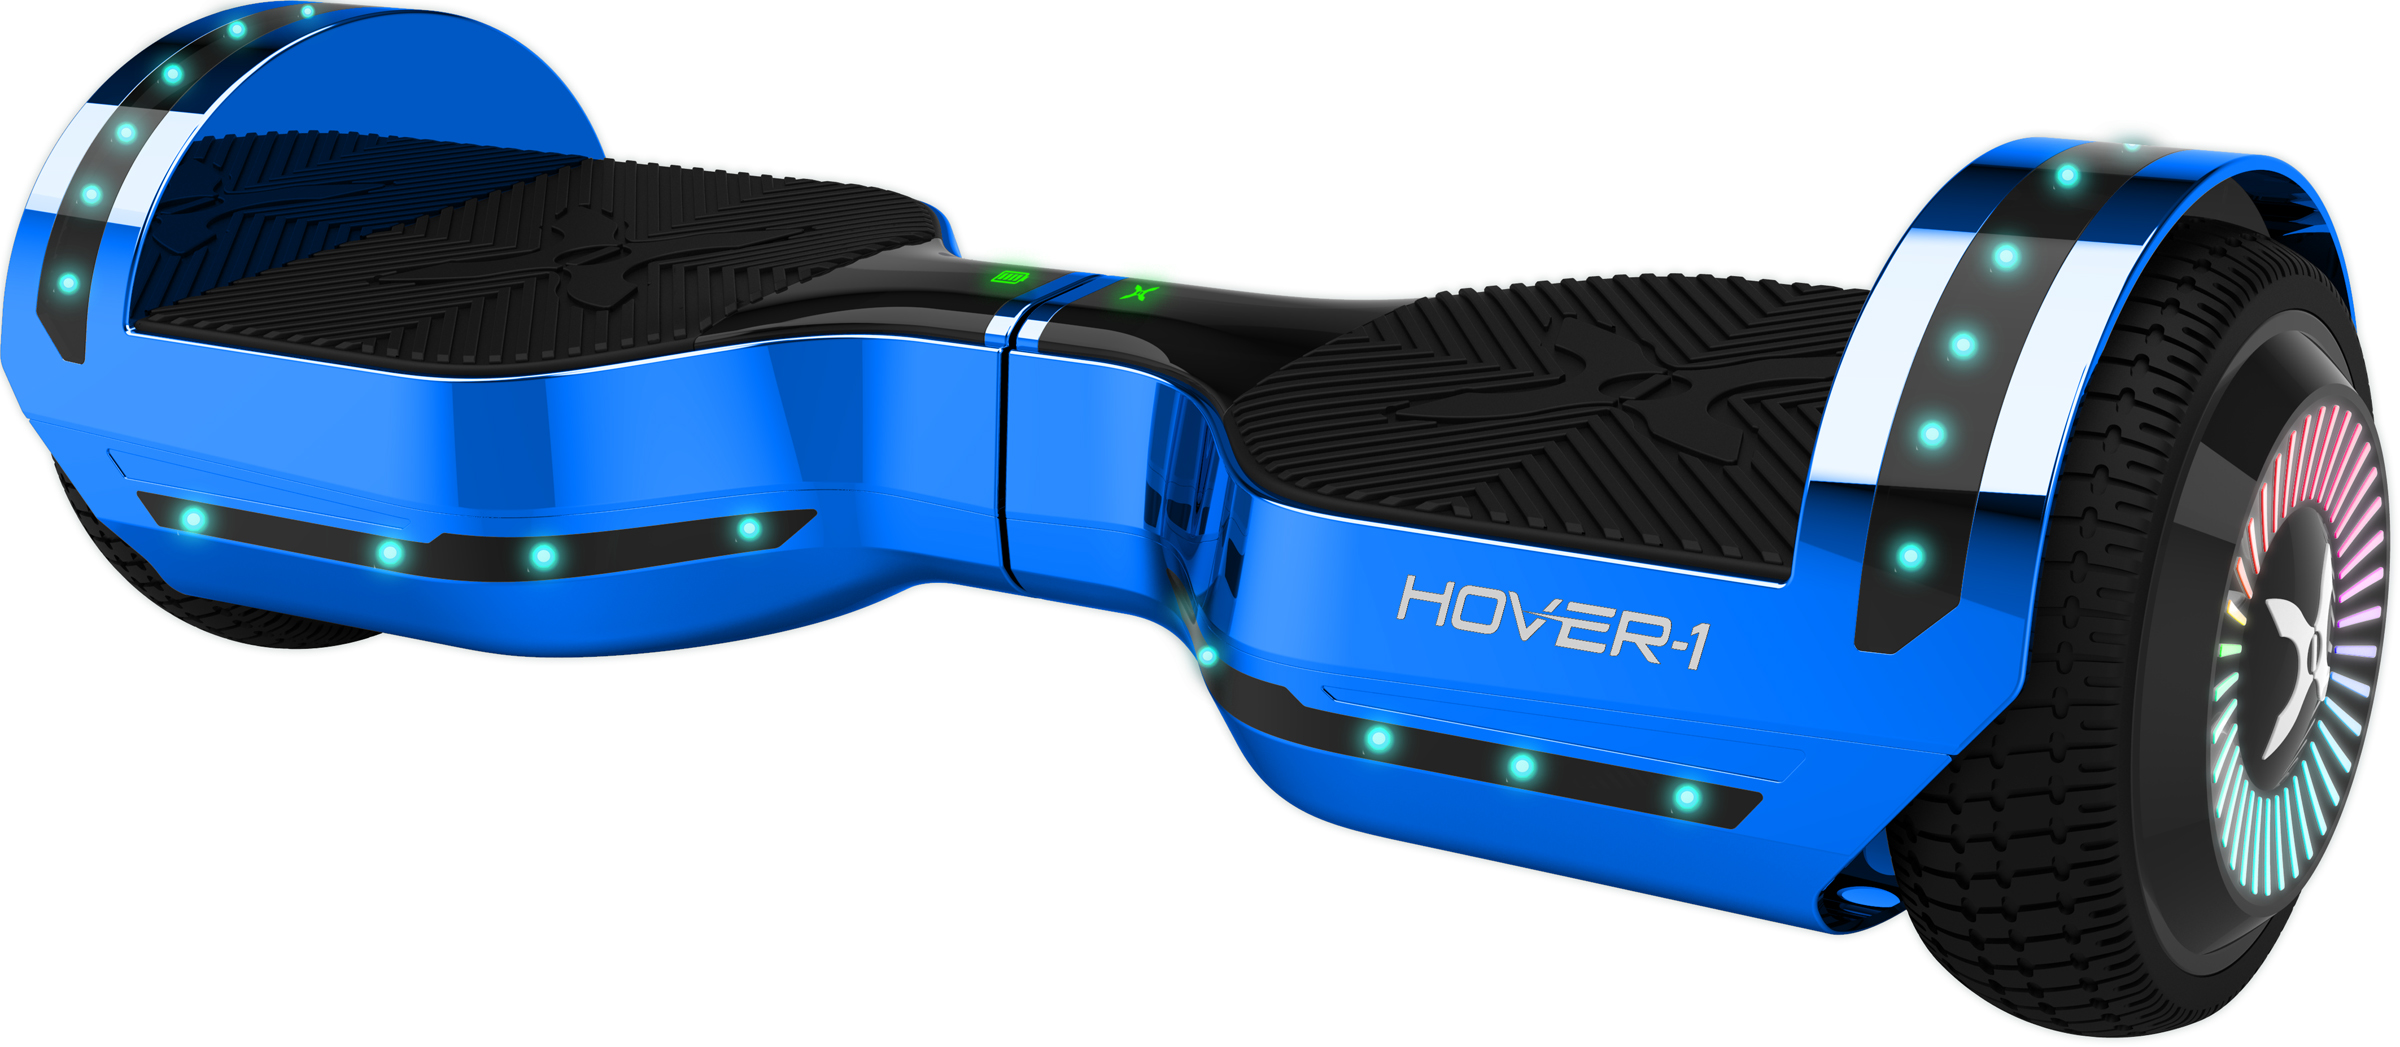 Hover-1 Chrome Hoverboard, LED Lights, Bluetooth Speaker, 6.5 In. Tires, 220 Lbs. Max weight, 7 mph - image 1 of 8